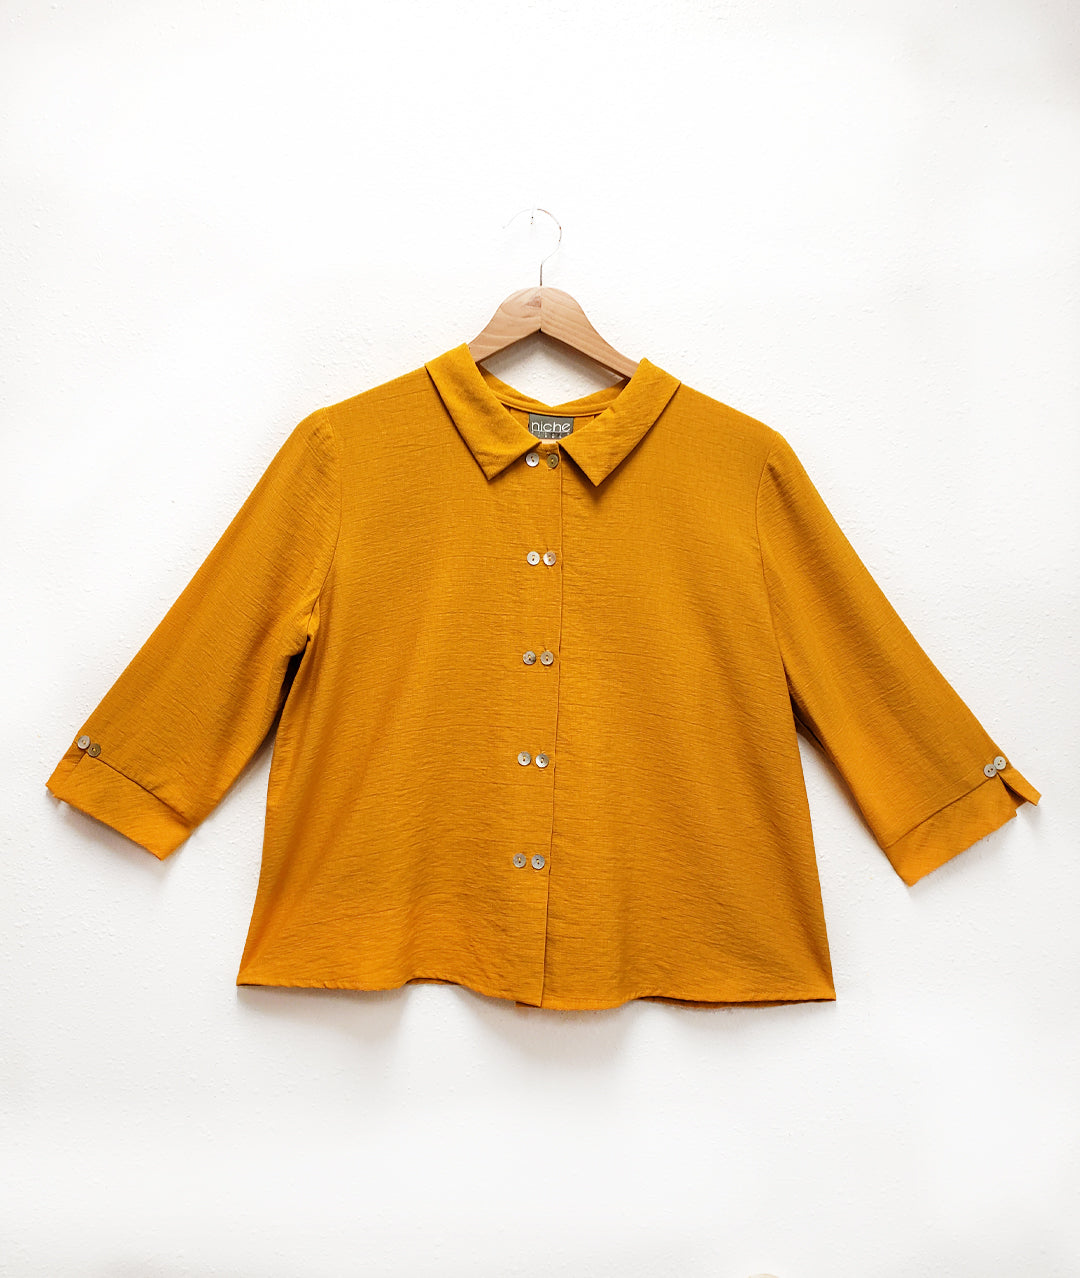 saffron yellow button down blouse with twin button up the front placket. Each sleeve cuff has a split and twin buttons.